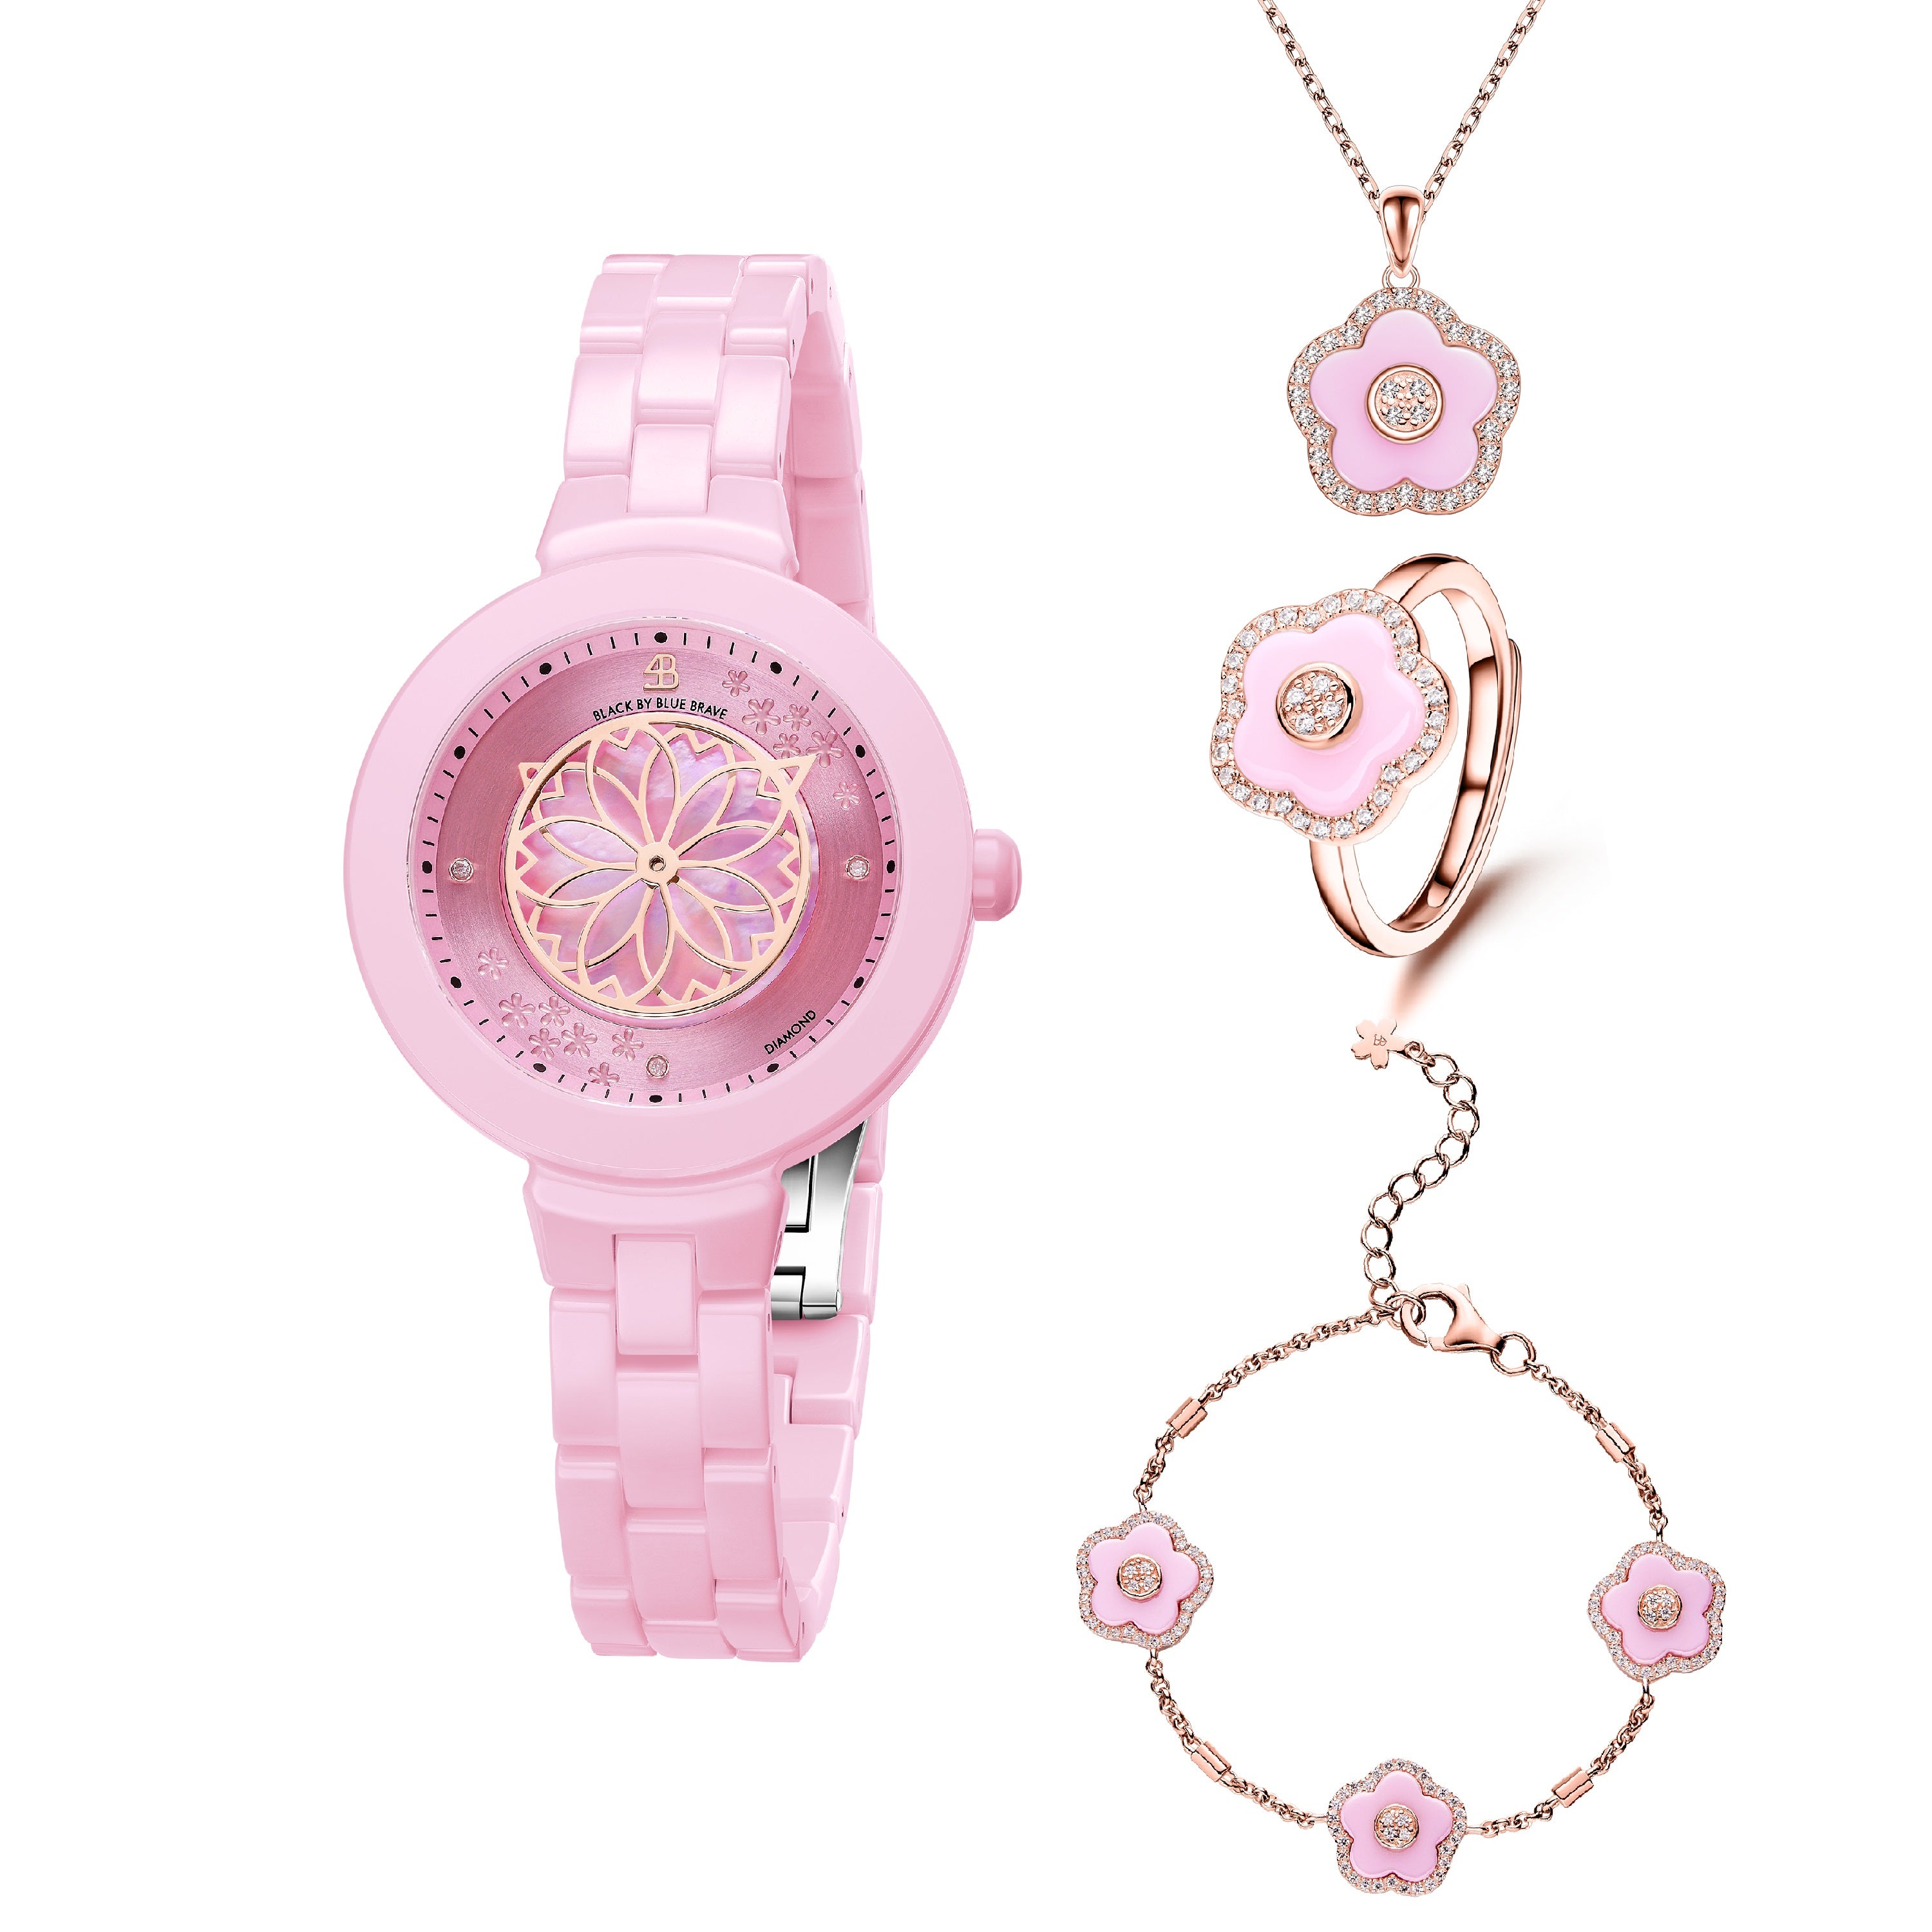 Pink Diamond Cherry Blossom Ceramic Watch With Flower Ceramic Jewelleries (Rings, Necklace and Bracelet )